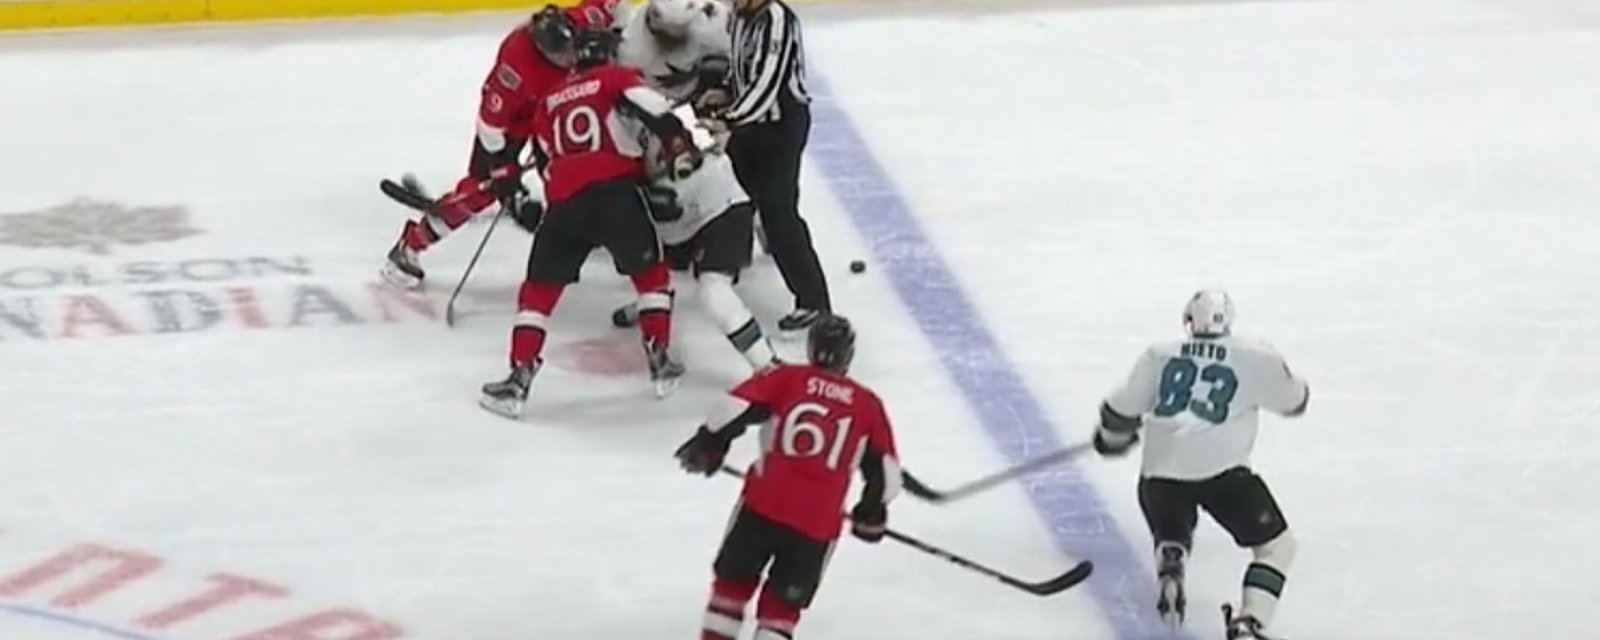 Brent Burns and Bobby Ryan both yell “Aw F**k! After being hit by the puck seconds apart.